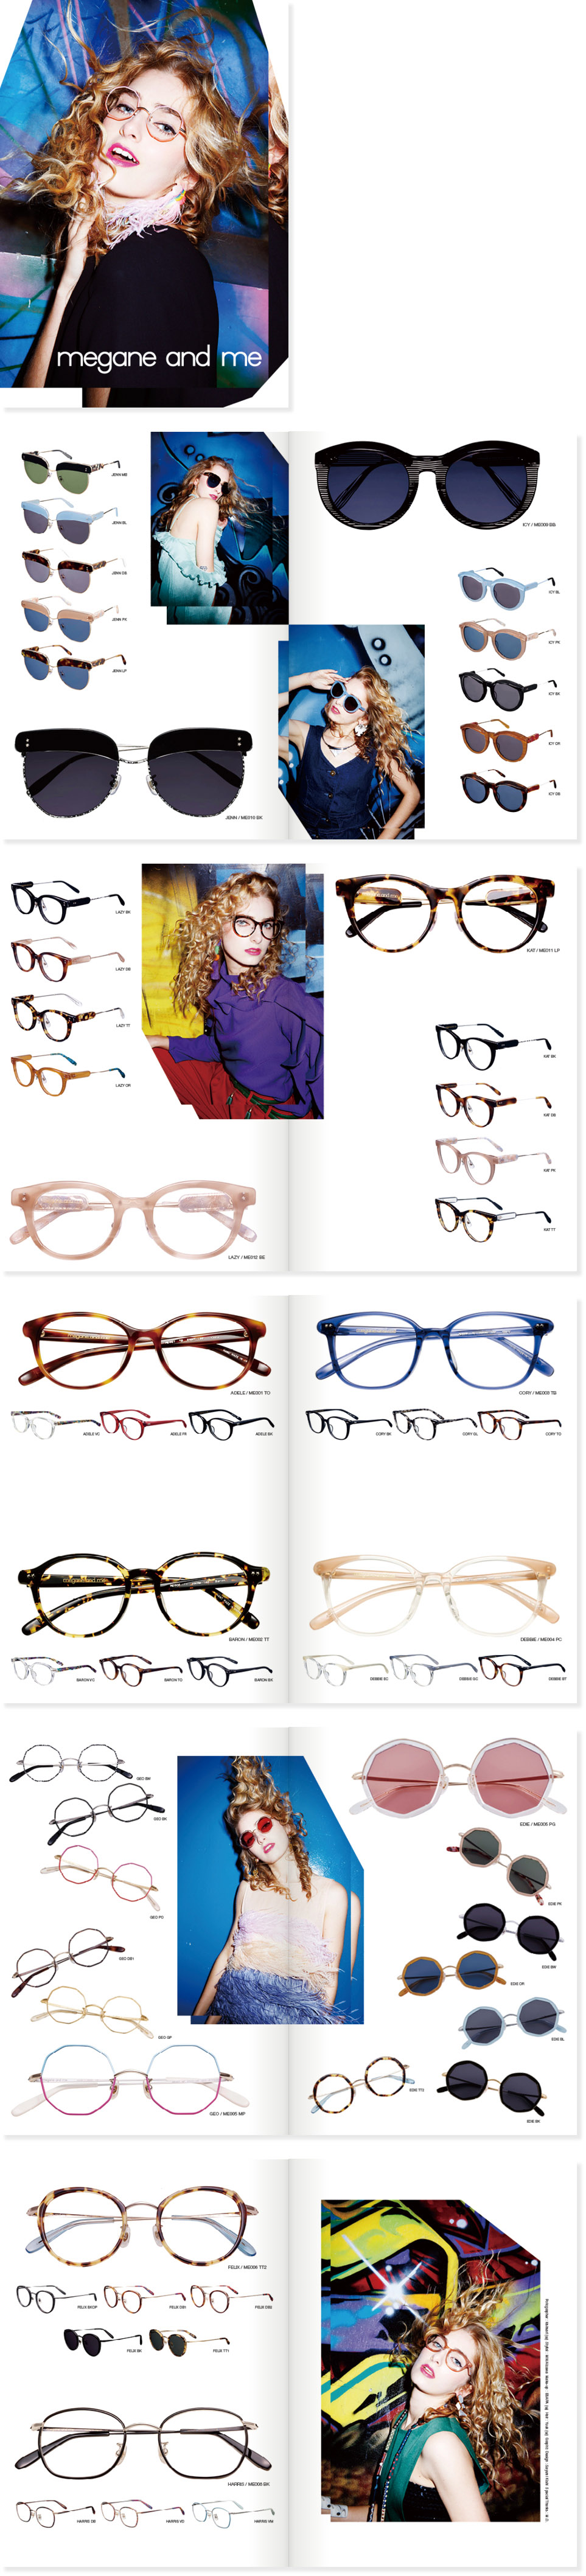 megane and me POSTER & LOOK BOOK 2016